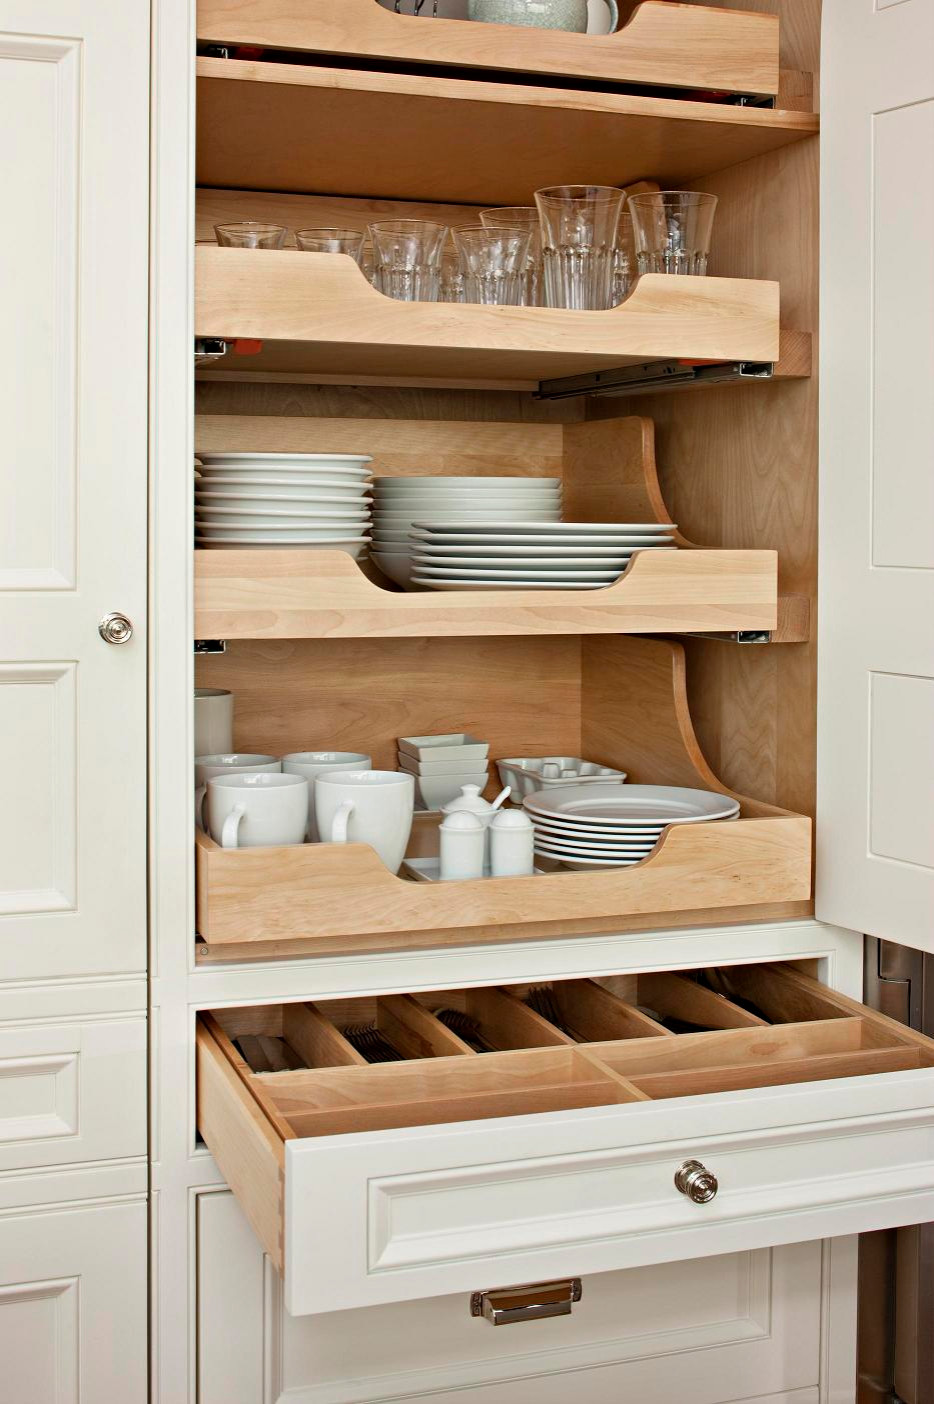 How to Organize Dishes in a Hoosier Cabinet插图1